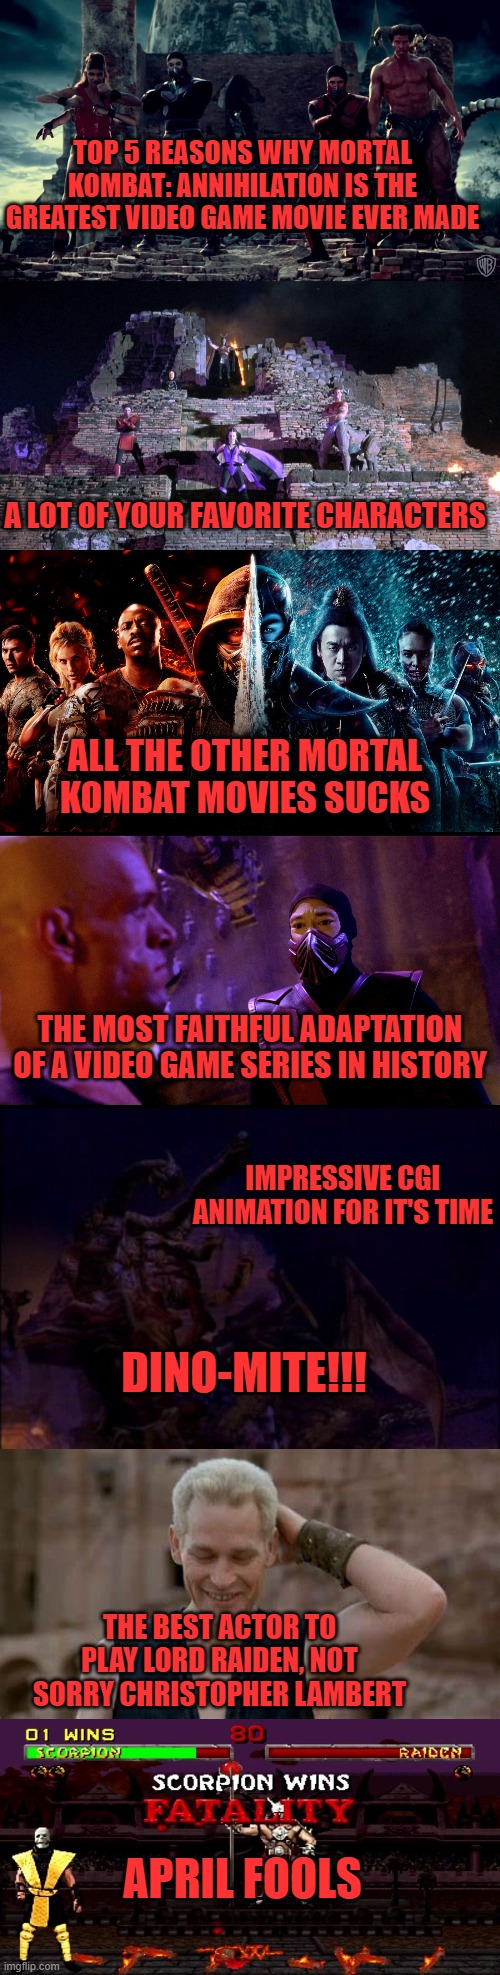 TOP 5 REASONS WHY MORTAL KOMBAT: ANNIHILATION IS THE GREATEST VIDEO GAME MOVIE EVER MADE; A LOT OF YOUR FAVORITE CHARACTERS; ALL THE OTHER MORTAL KOMBAT MOVIES SUCKS; THE MOST FAITHFUL ADAPTATION OF A VIDEO GAME SERIES IN HISTORY; IMPRESSIVE CGI ANIMATION FOR IT'S TIME; DINO-MITE!!! THE BEST ACTOR TO PLAY LORD RAIDEN, NOT SORRY CHRISTOPHER LAMBERT; APRIL FOOLS | image tagged in mortal kombat,video games,april,fools,fighting,cgi suckality | made w/ Imgflip meme maker